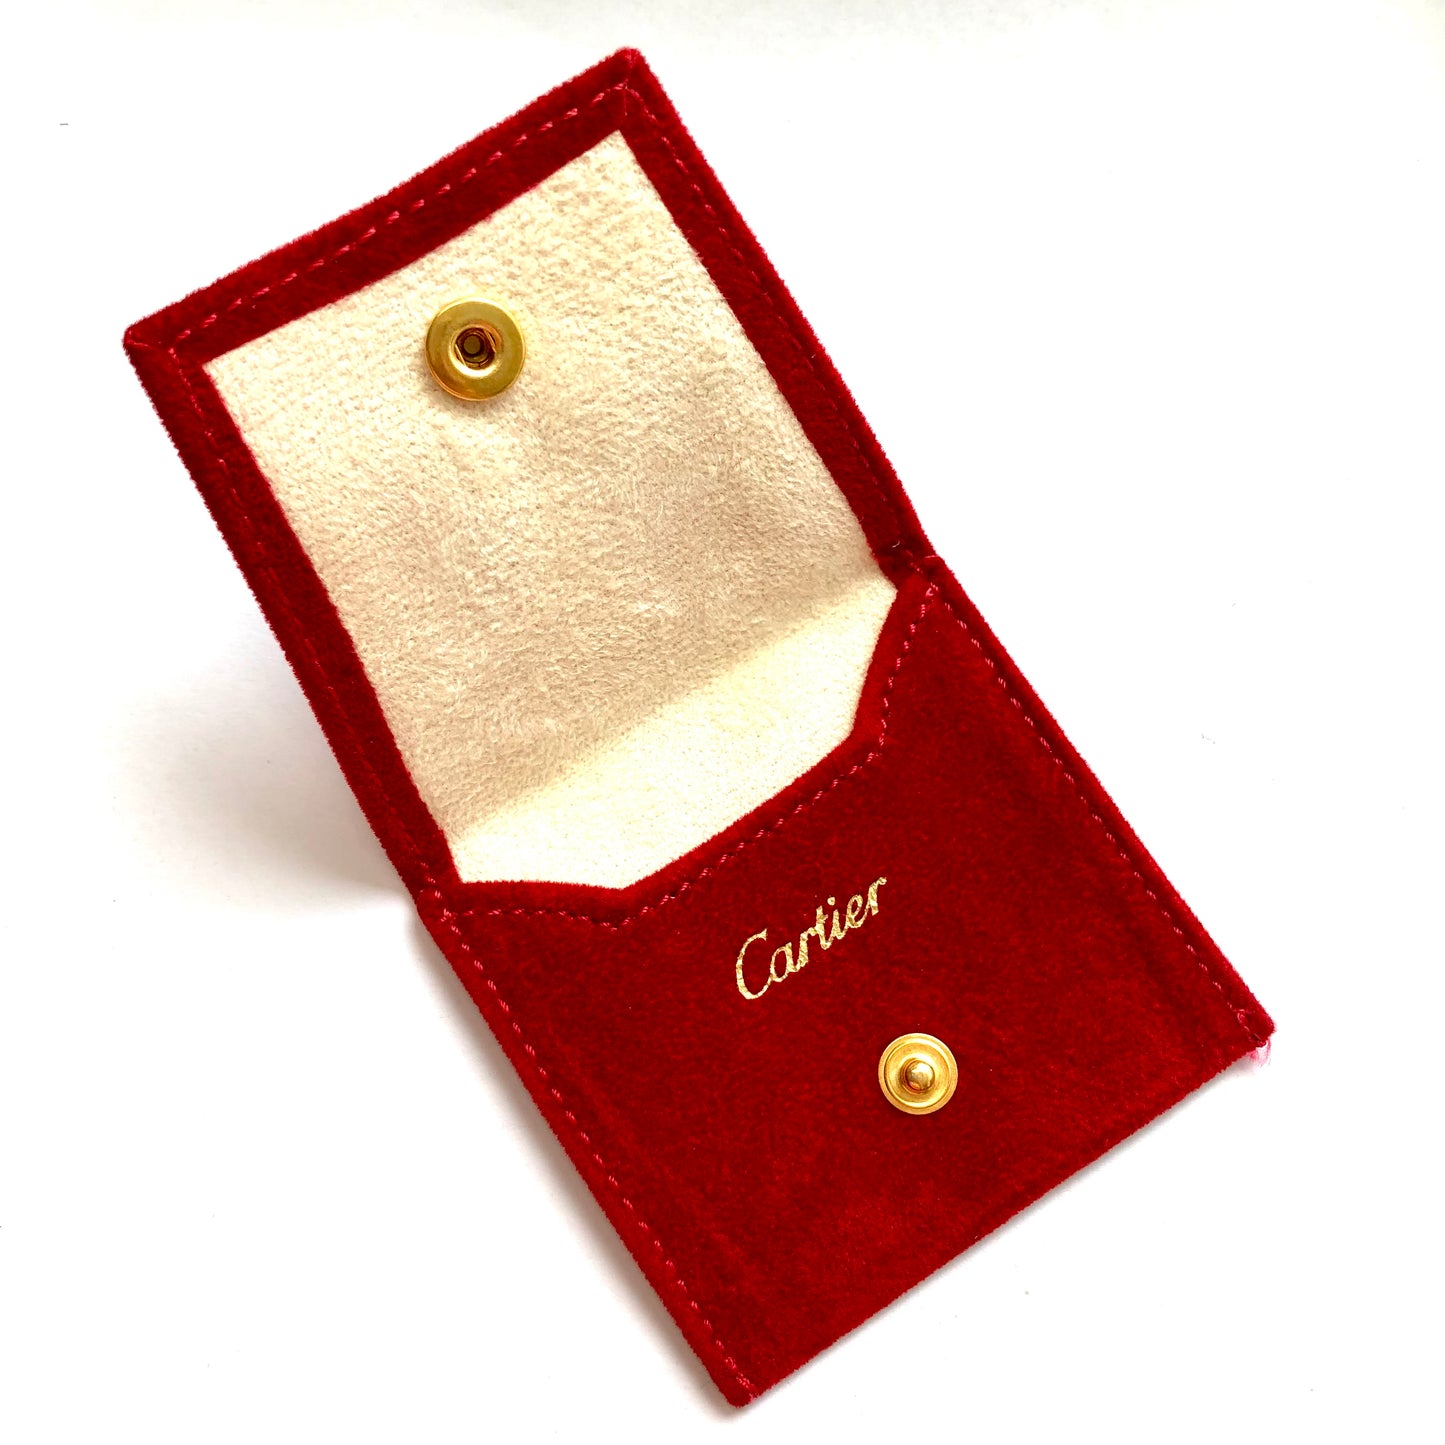 CARTIER Red Faux Suede Jewelry Pouch 2.5x2.25 inches